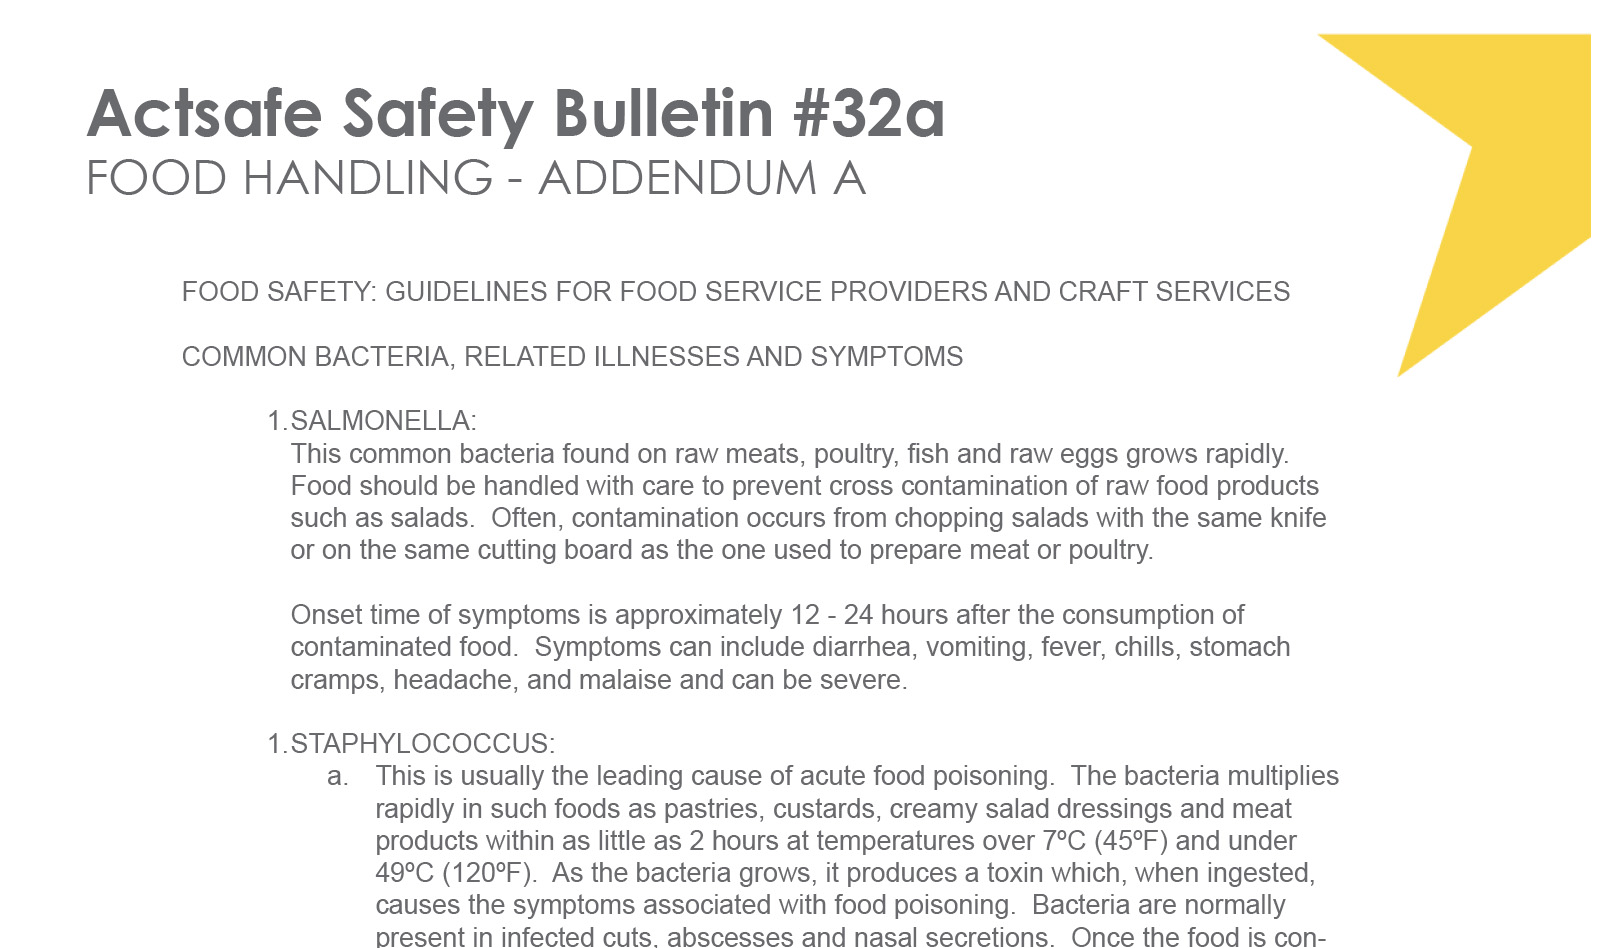 #32A Addendum “A” for Food Handling – Craft Services Motion Picture Safety Bulletin